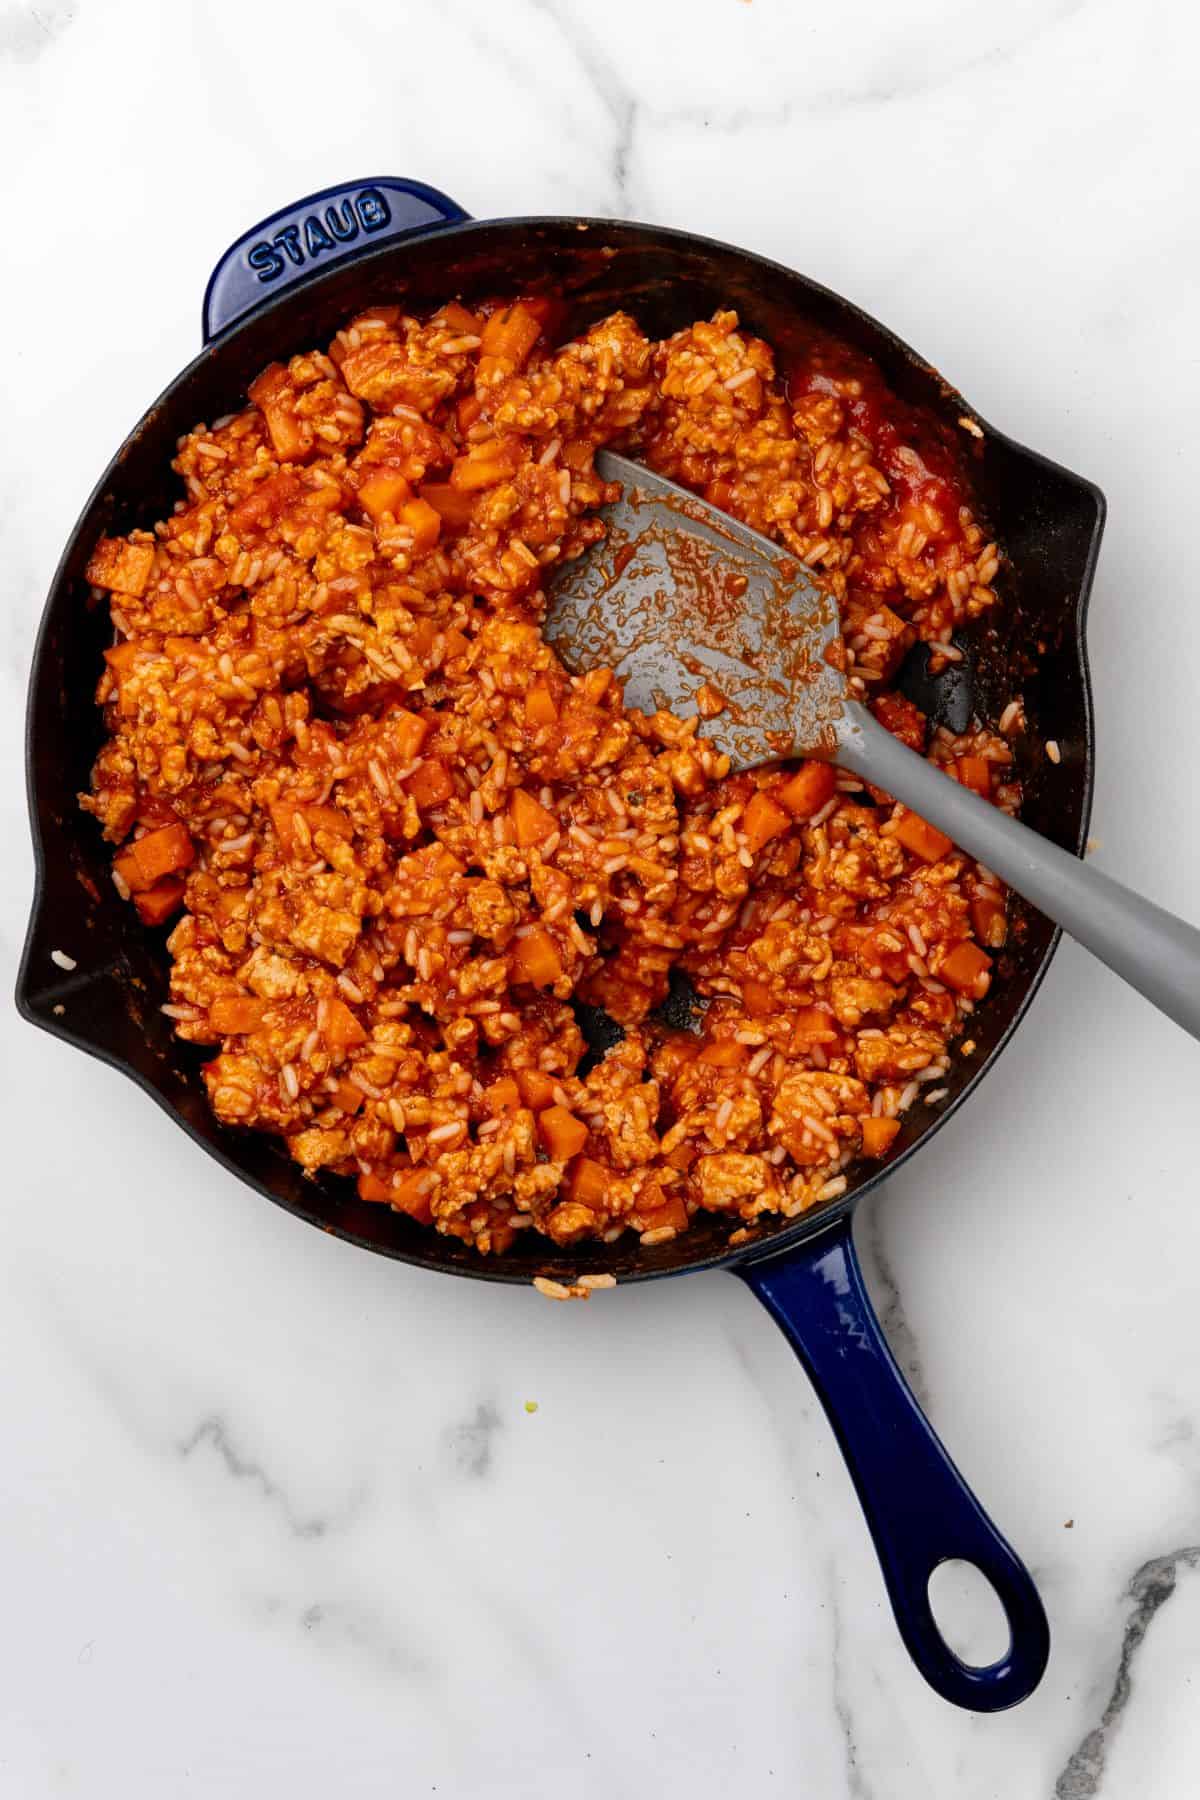 A pan filled with rice, ground chicken, carrots, and marninara sauce. 